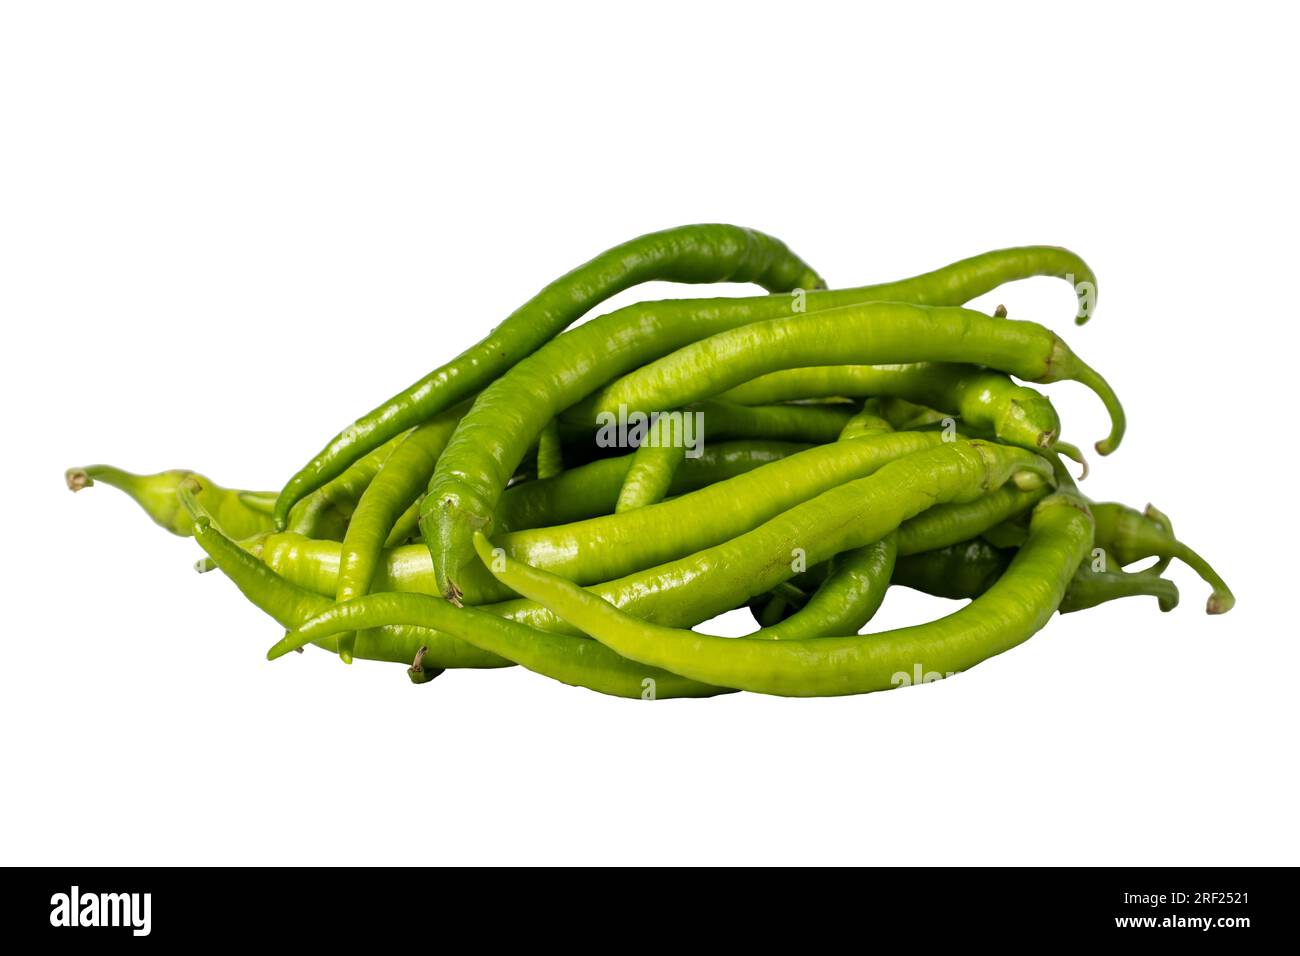 Green pepper isolated on white background. Fresh raw green chili pepper harvest season concept. Vegetables for a healthy diet Stock Photo